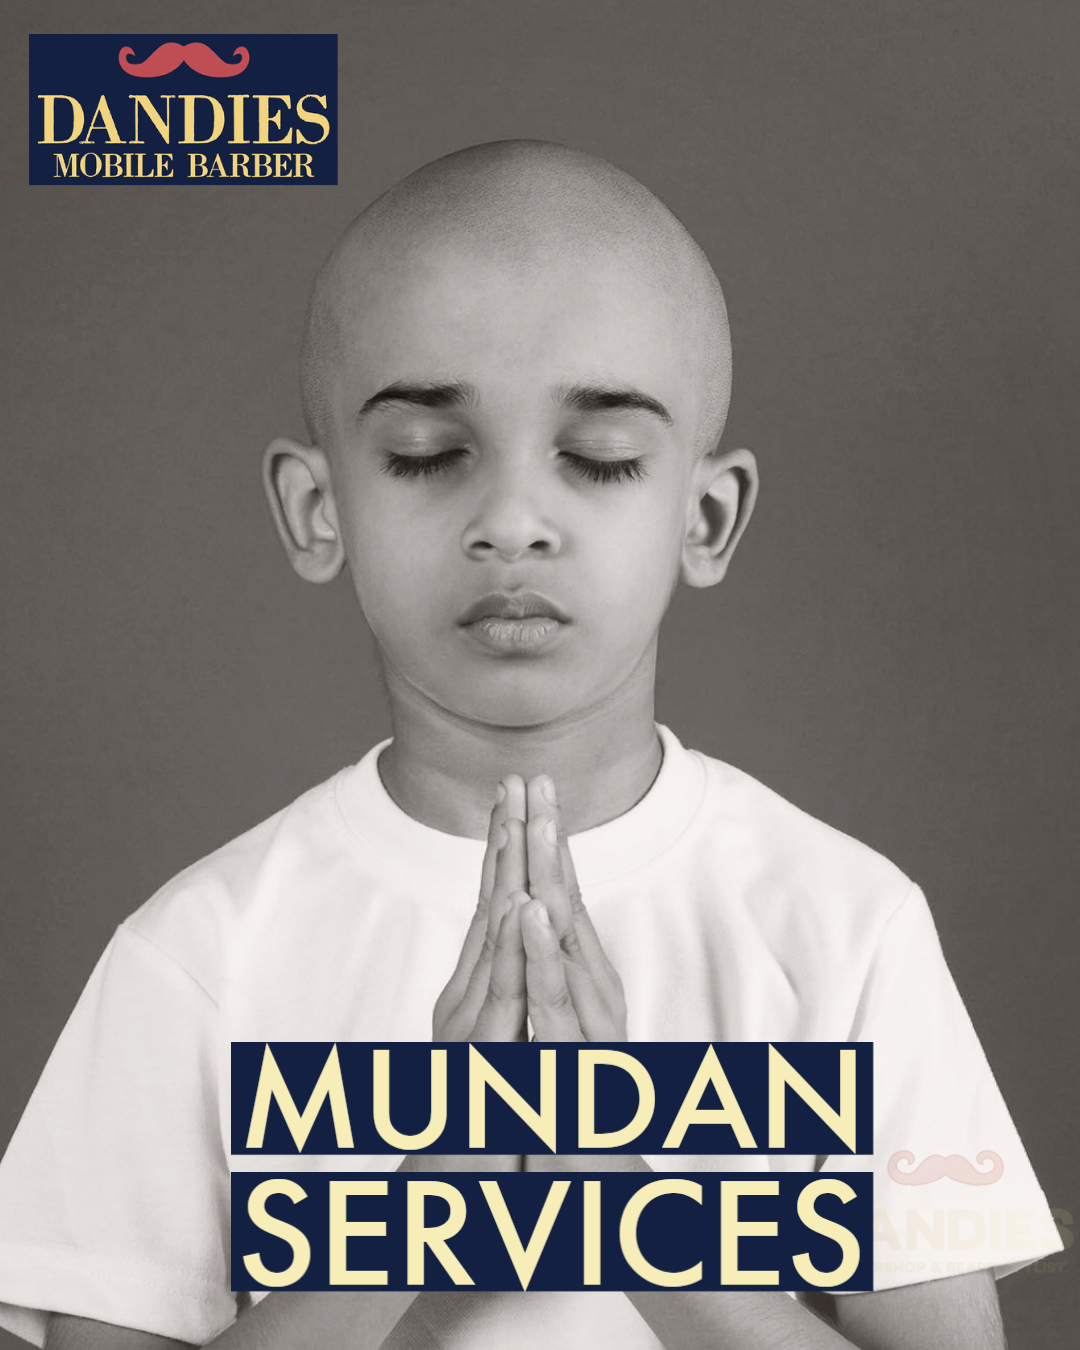 What tools and equipment will be using for the Mundan haircut?